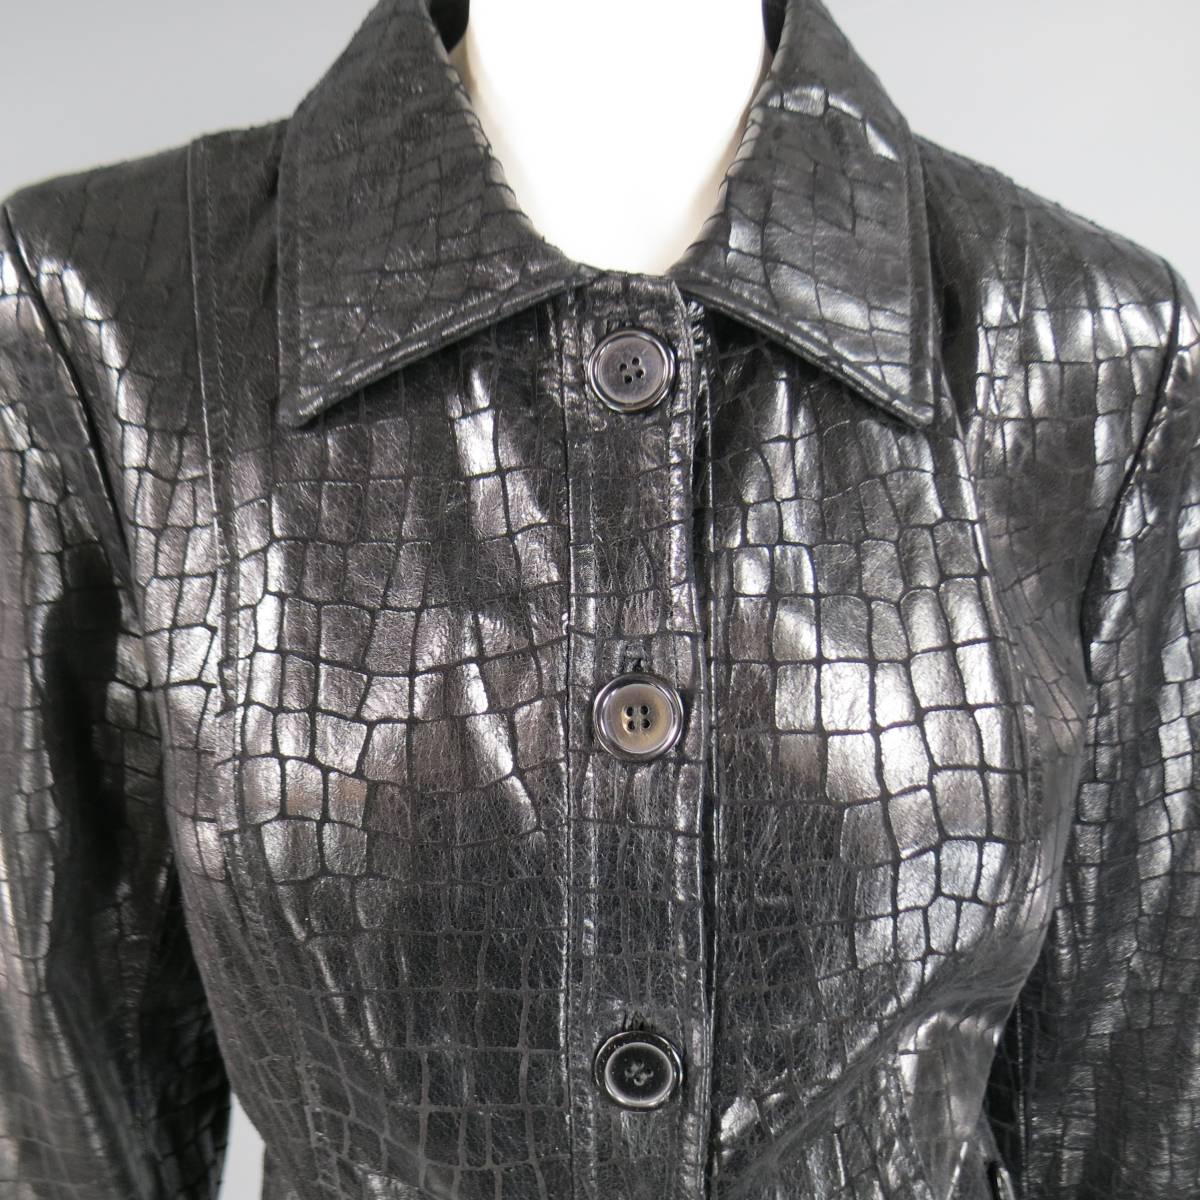 This fabulous NEIMAN MARCUS Exclusive jacket comes in a high shine, crocodile print leather and features a pointed collar, single breasted four button closure, patch flap pockets, and slight peplum silhouette.
 
Excellent Pre-Owned